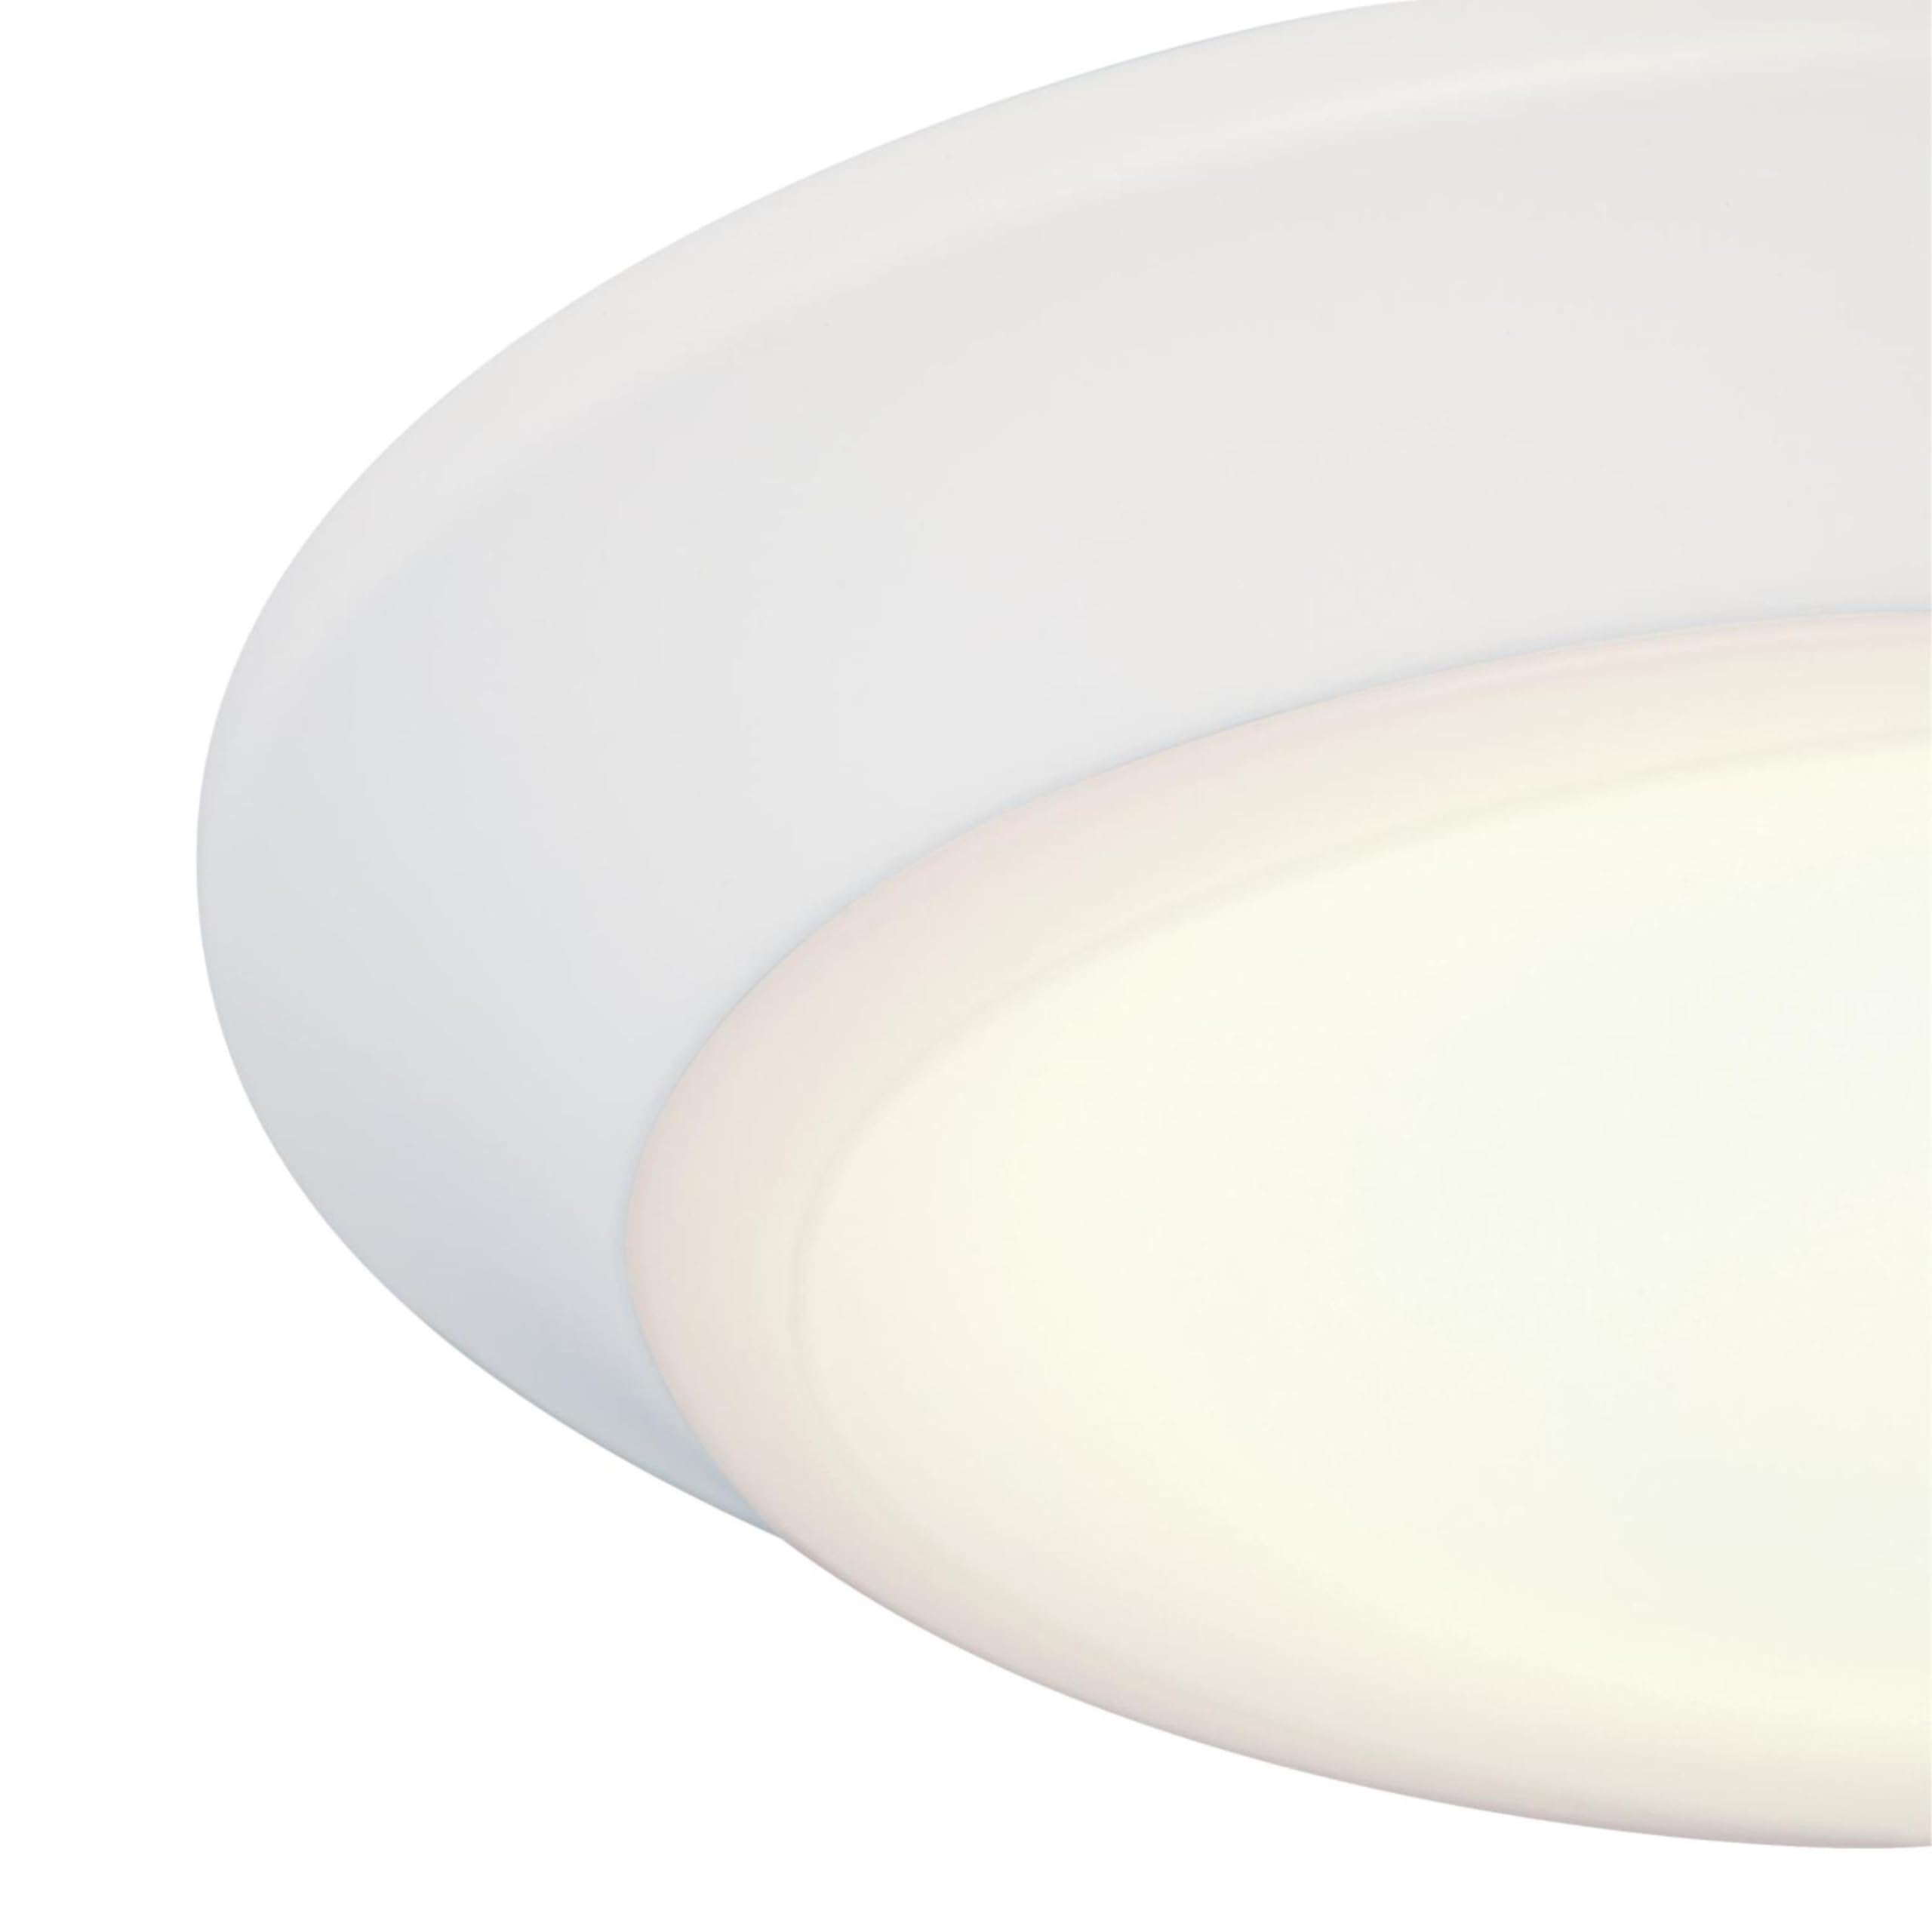 Westinghouse Lighting 6134000 Makira Traditional One-Light, 7.5 Inch 16 Watt Dimmable LED Indoor/Outdoor Surface Mount Fixture with Color Temperature Selection, White Finish, Frosted Acrylic Shade